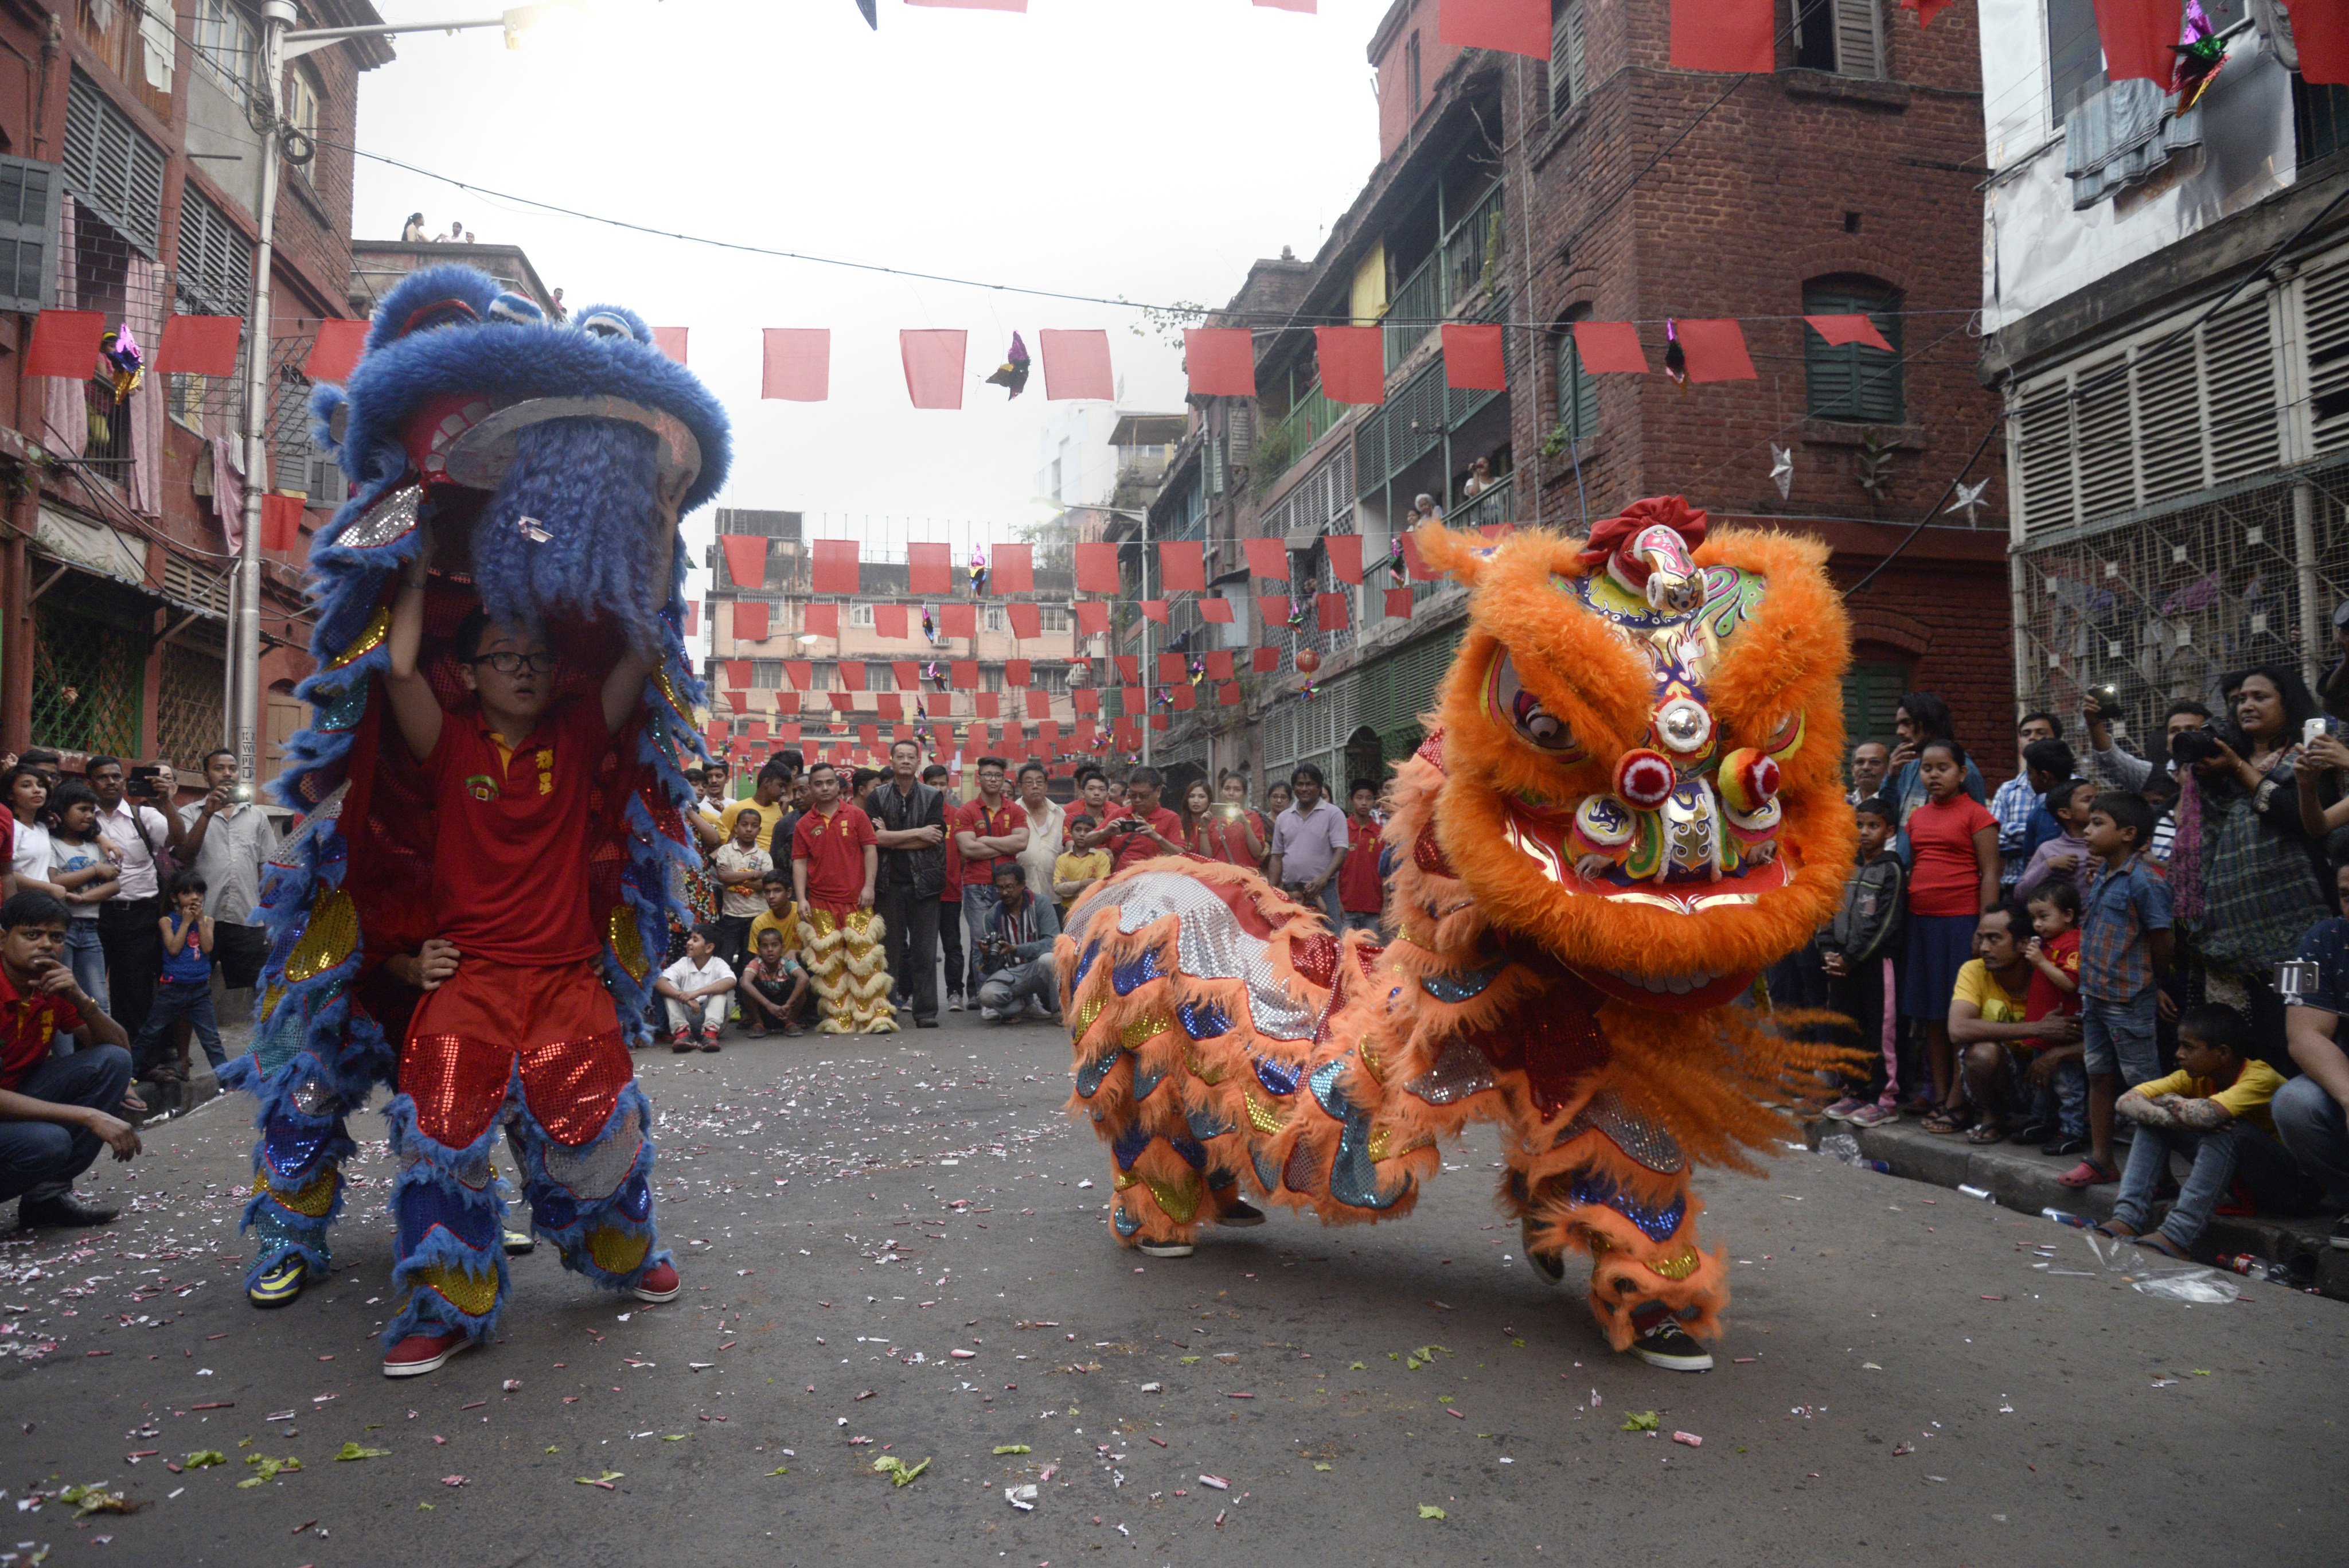 A lion dance is performed during a Lunar New Year celebration in Kolkata, India. File photo: Shutterstock